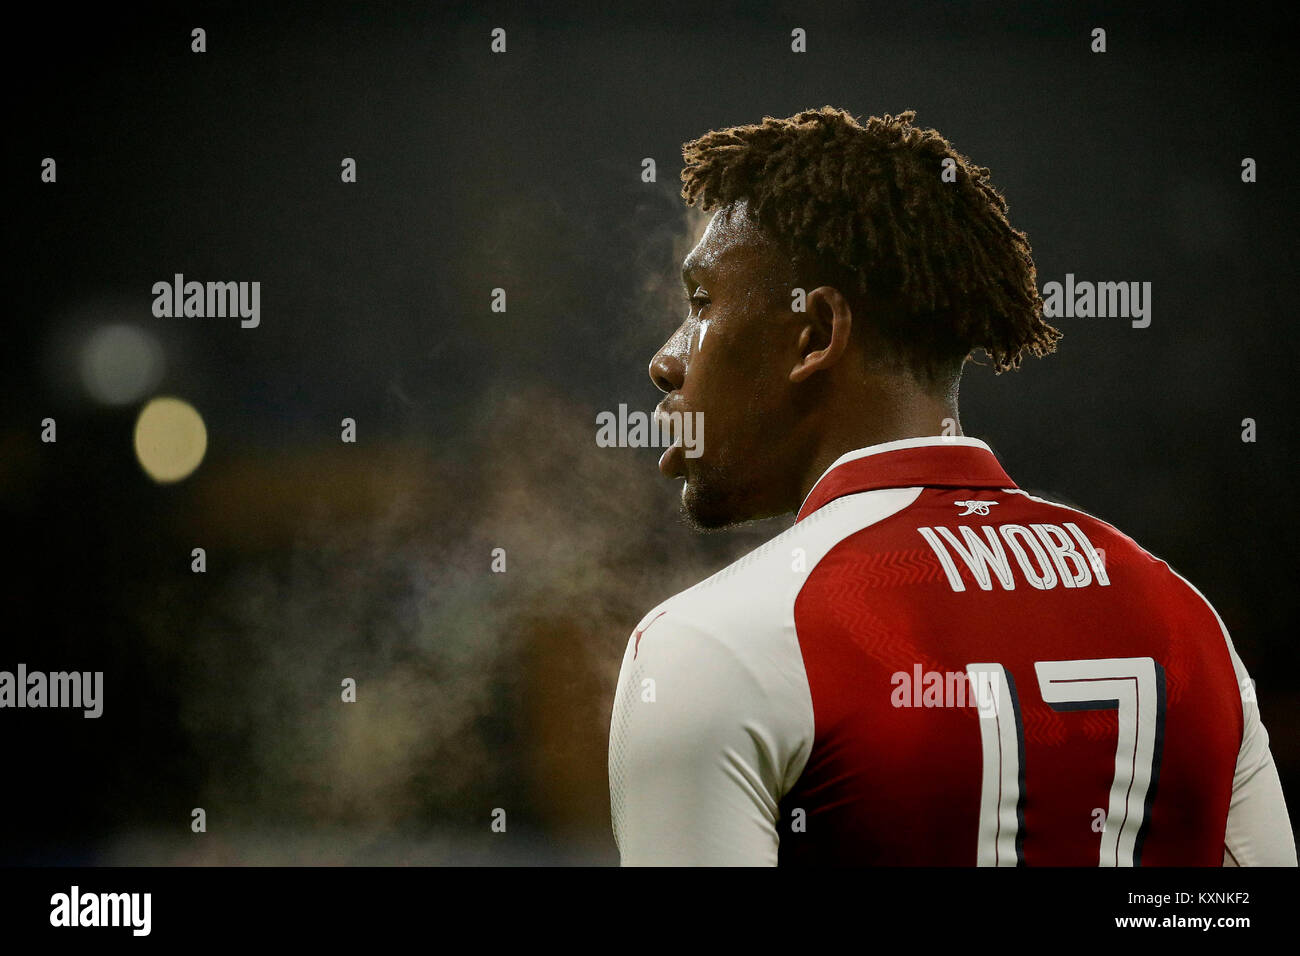 London, UK. 10th Jan, 2018. Arsenal's Alex Iwobi looks across the pitch during the English League Cup semi-final 1st leg match between Chelsea and Arsenal at Stamford Bridge Stadium in London, Britain on Jan. 10, 2018. Chelsea and Arsenal drew 0-0. Credit: Tim Ireland/Xinhua/Alamy Live News Stock Photo